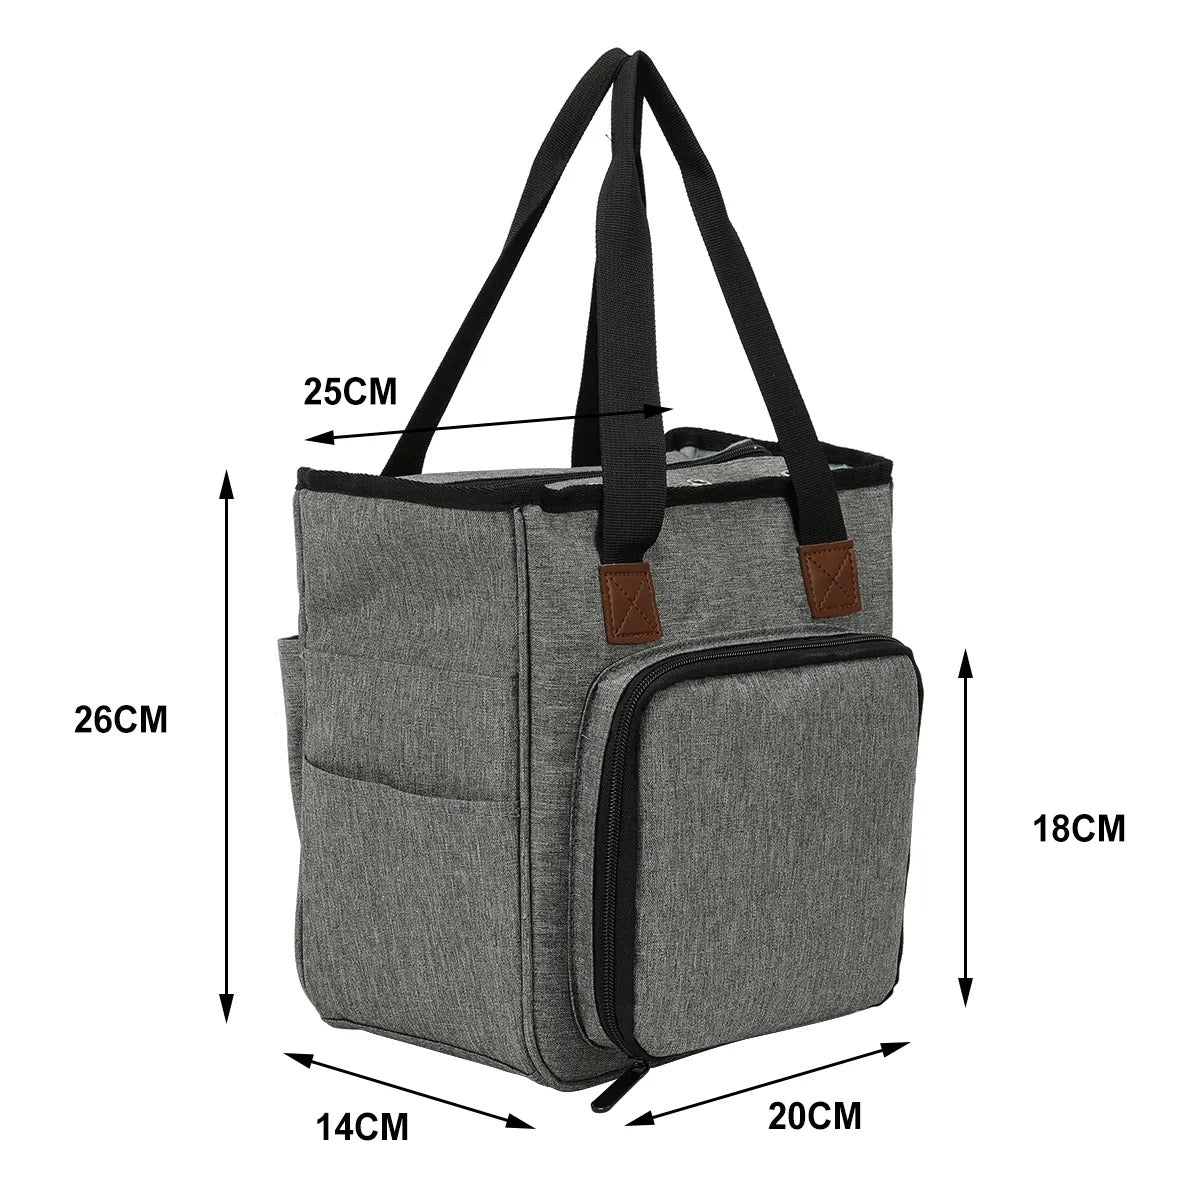 Gray Yarn Organizer Tote with dimensions labeled: 26cm high, 25cm wide, and 14cm deep at the base; front pocket measures 20cm by 18cm. 